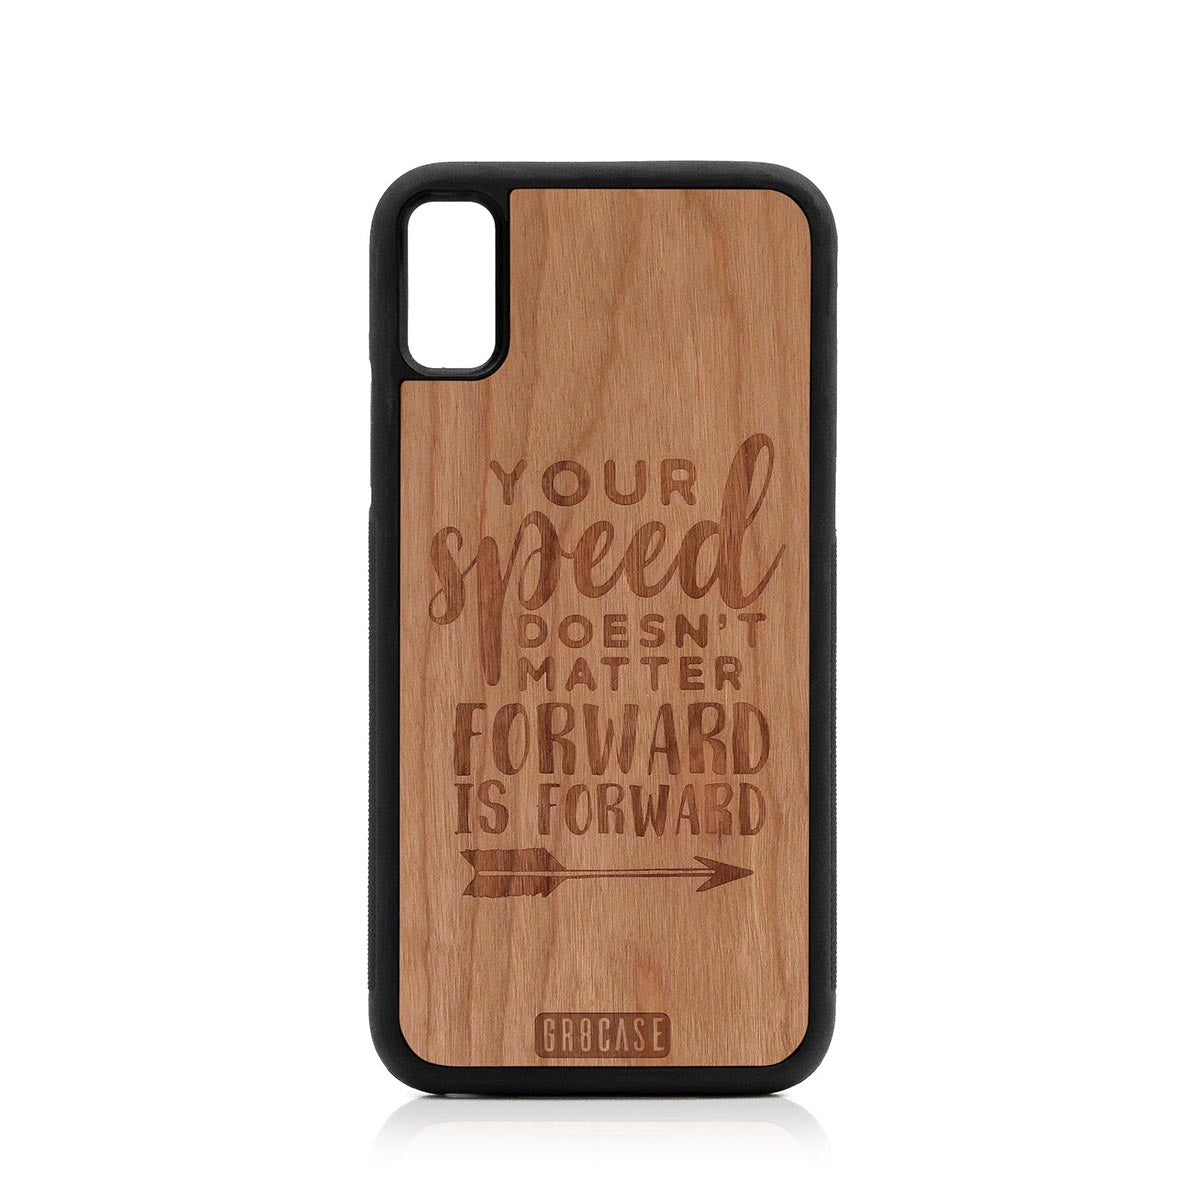 Your Speed Doesn't Matter Forward Is Forward Design Wood Case For iPhone XR